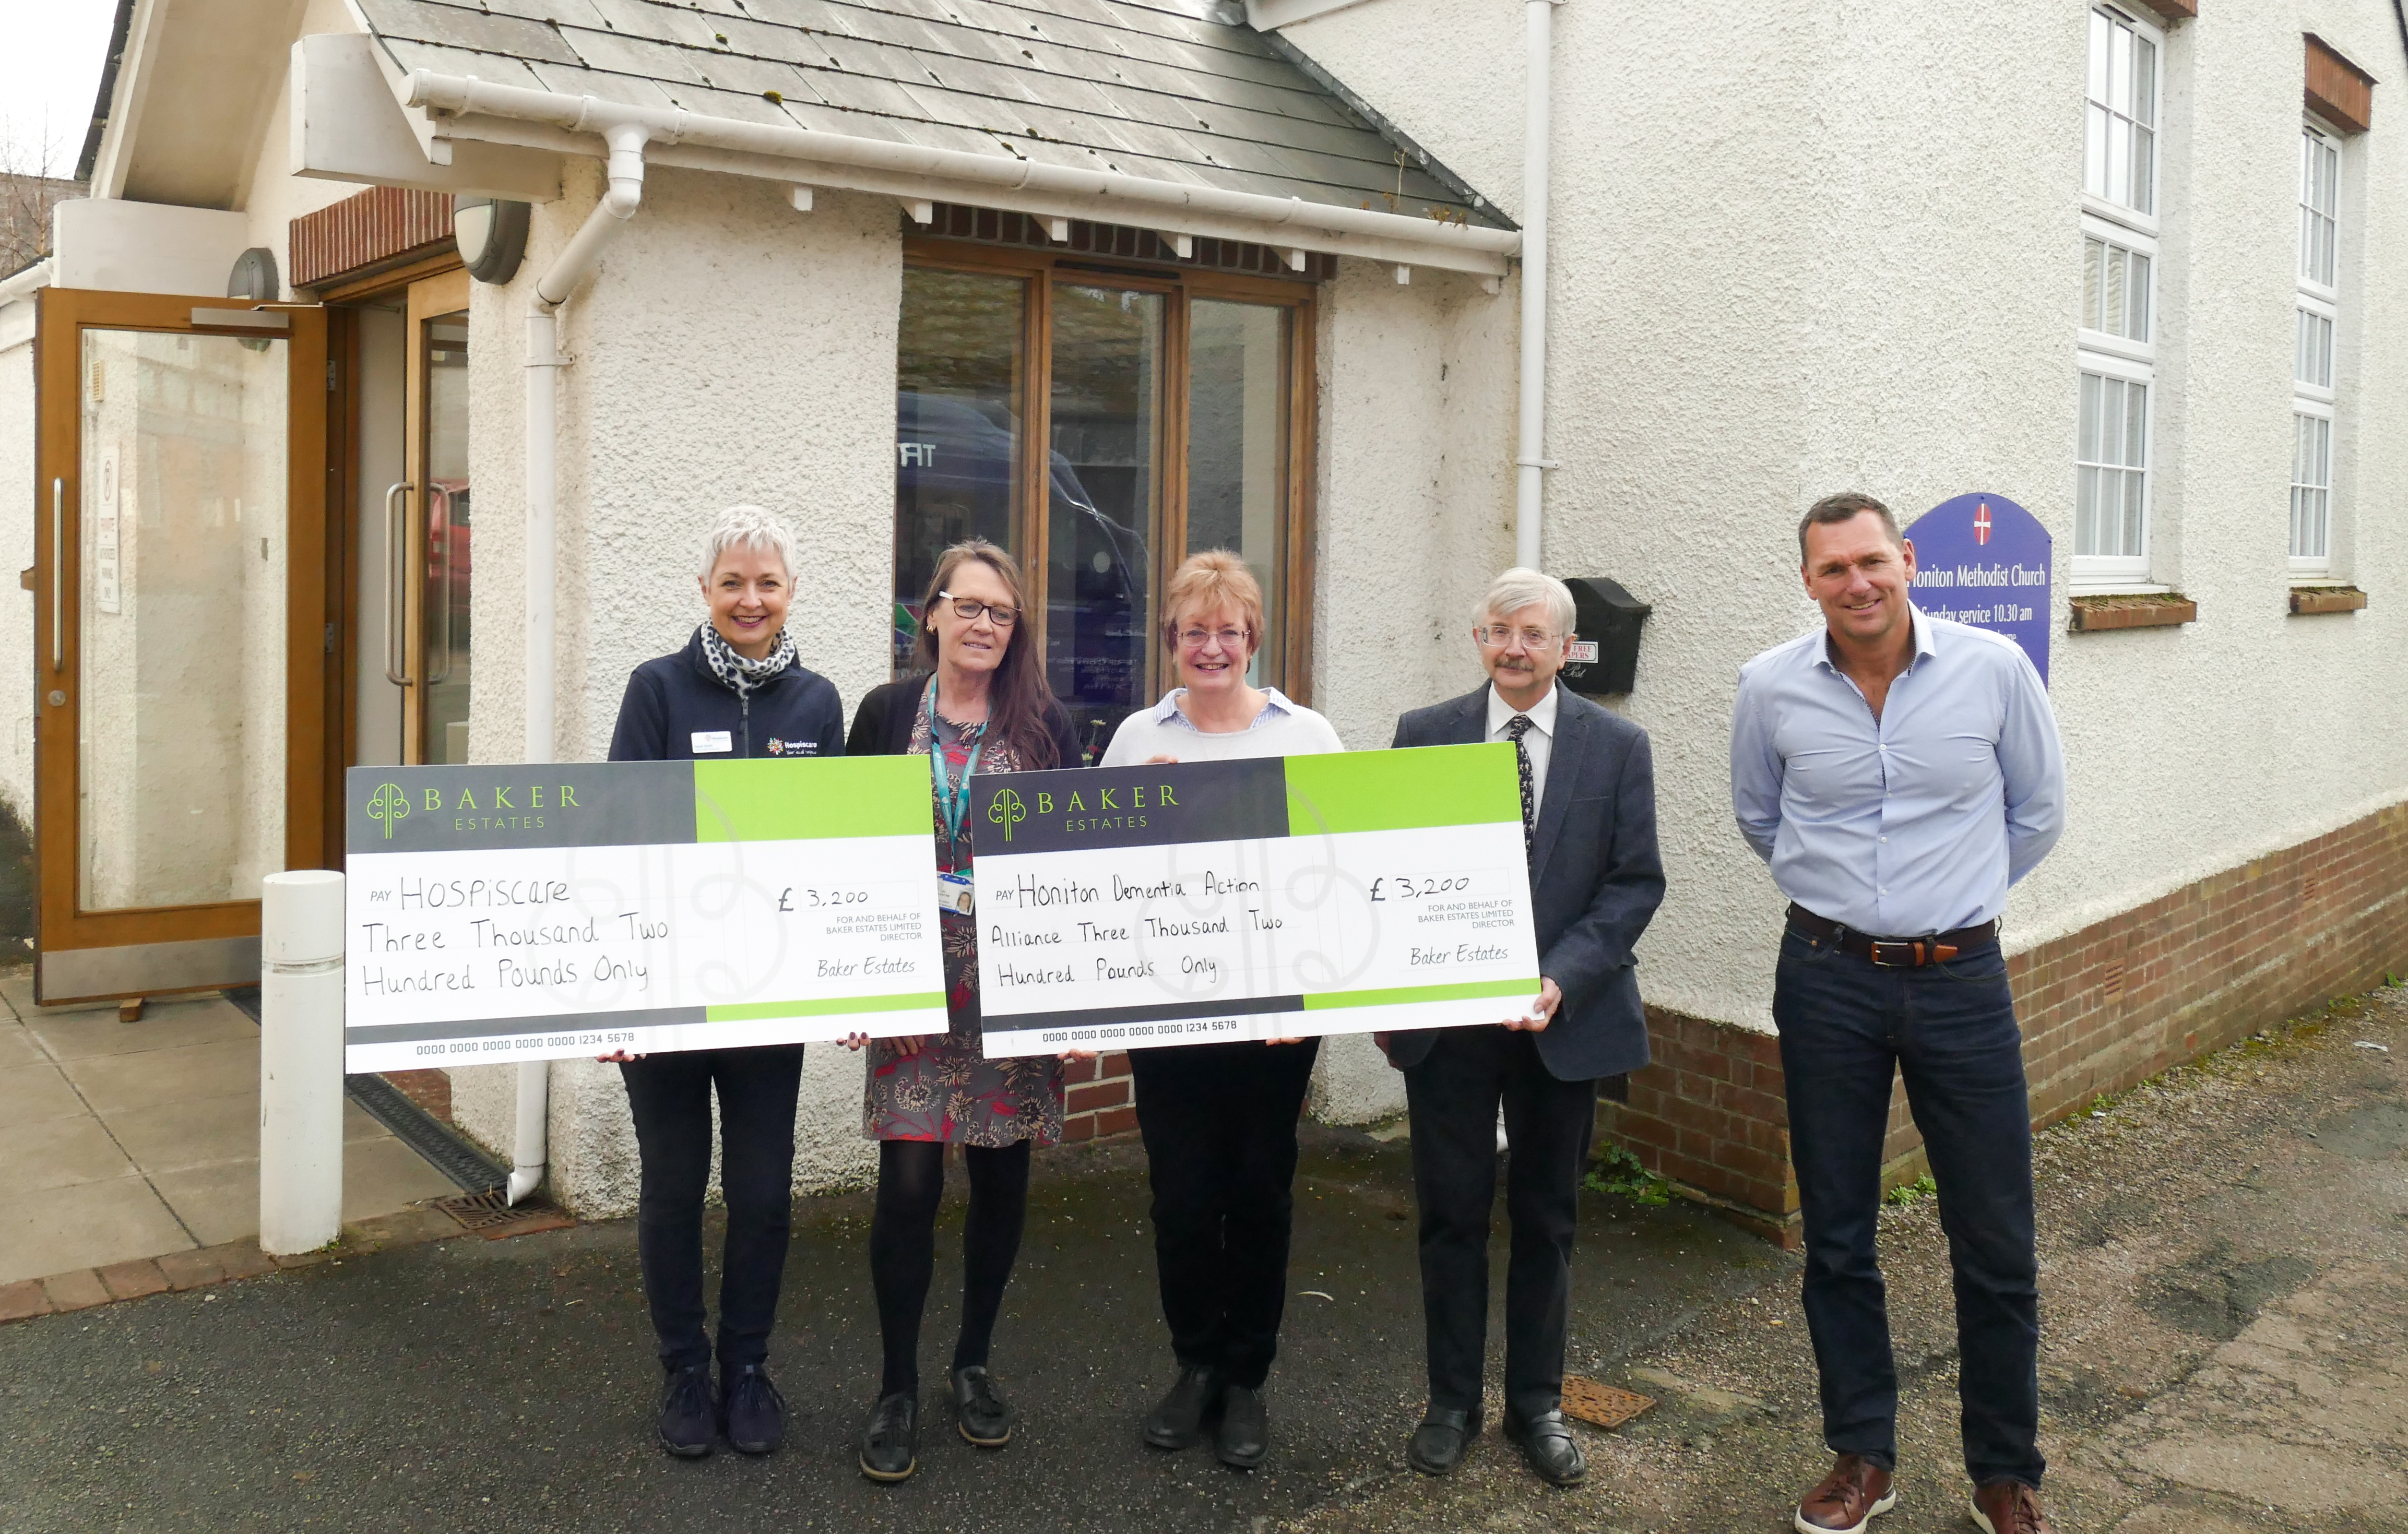 Baker Estates donates thousands of pounds to charities in Honiton